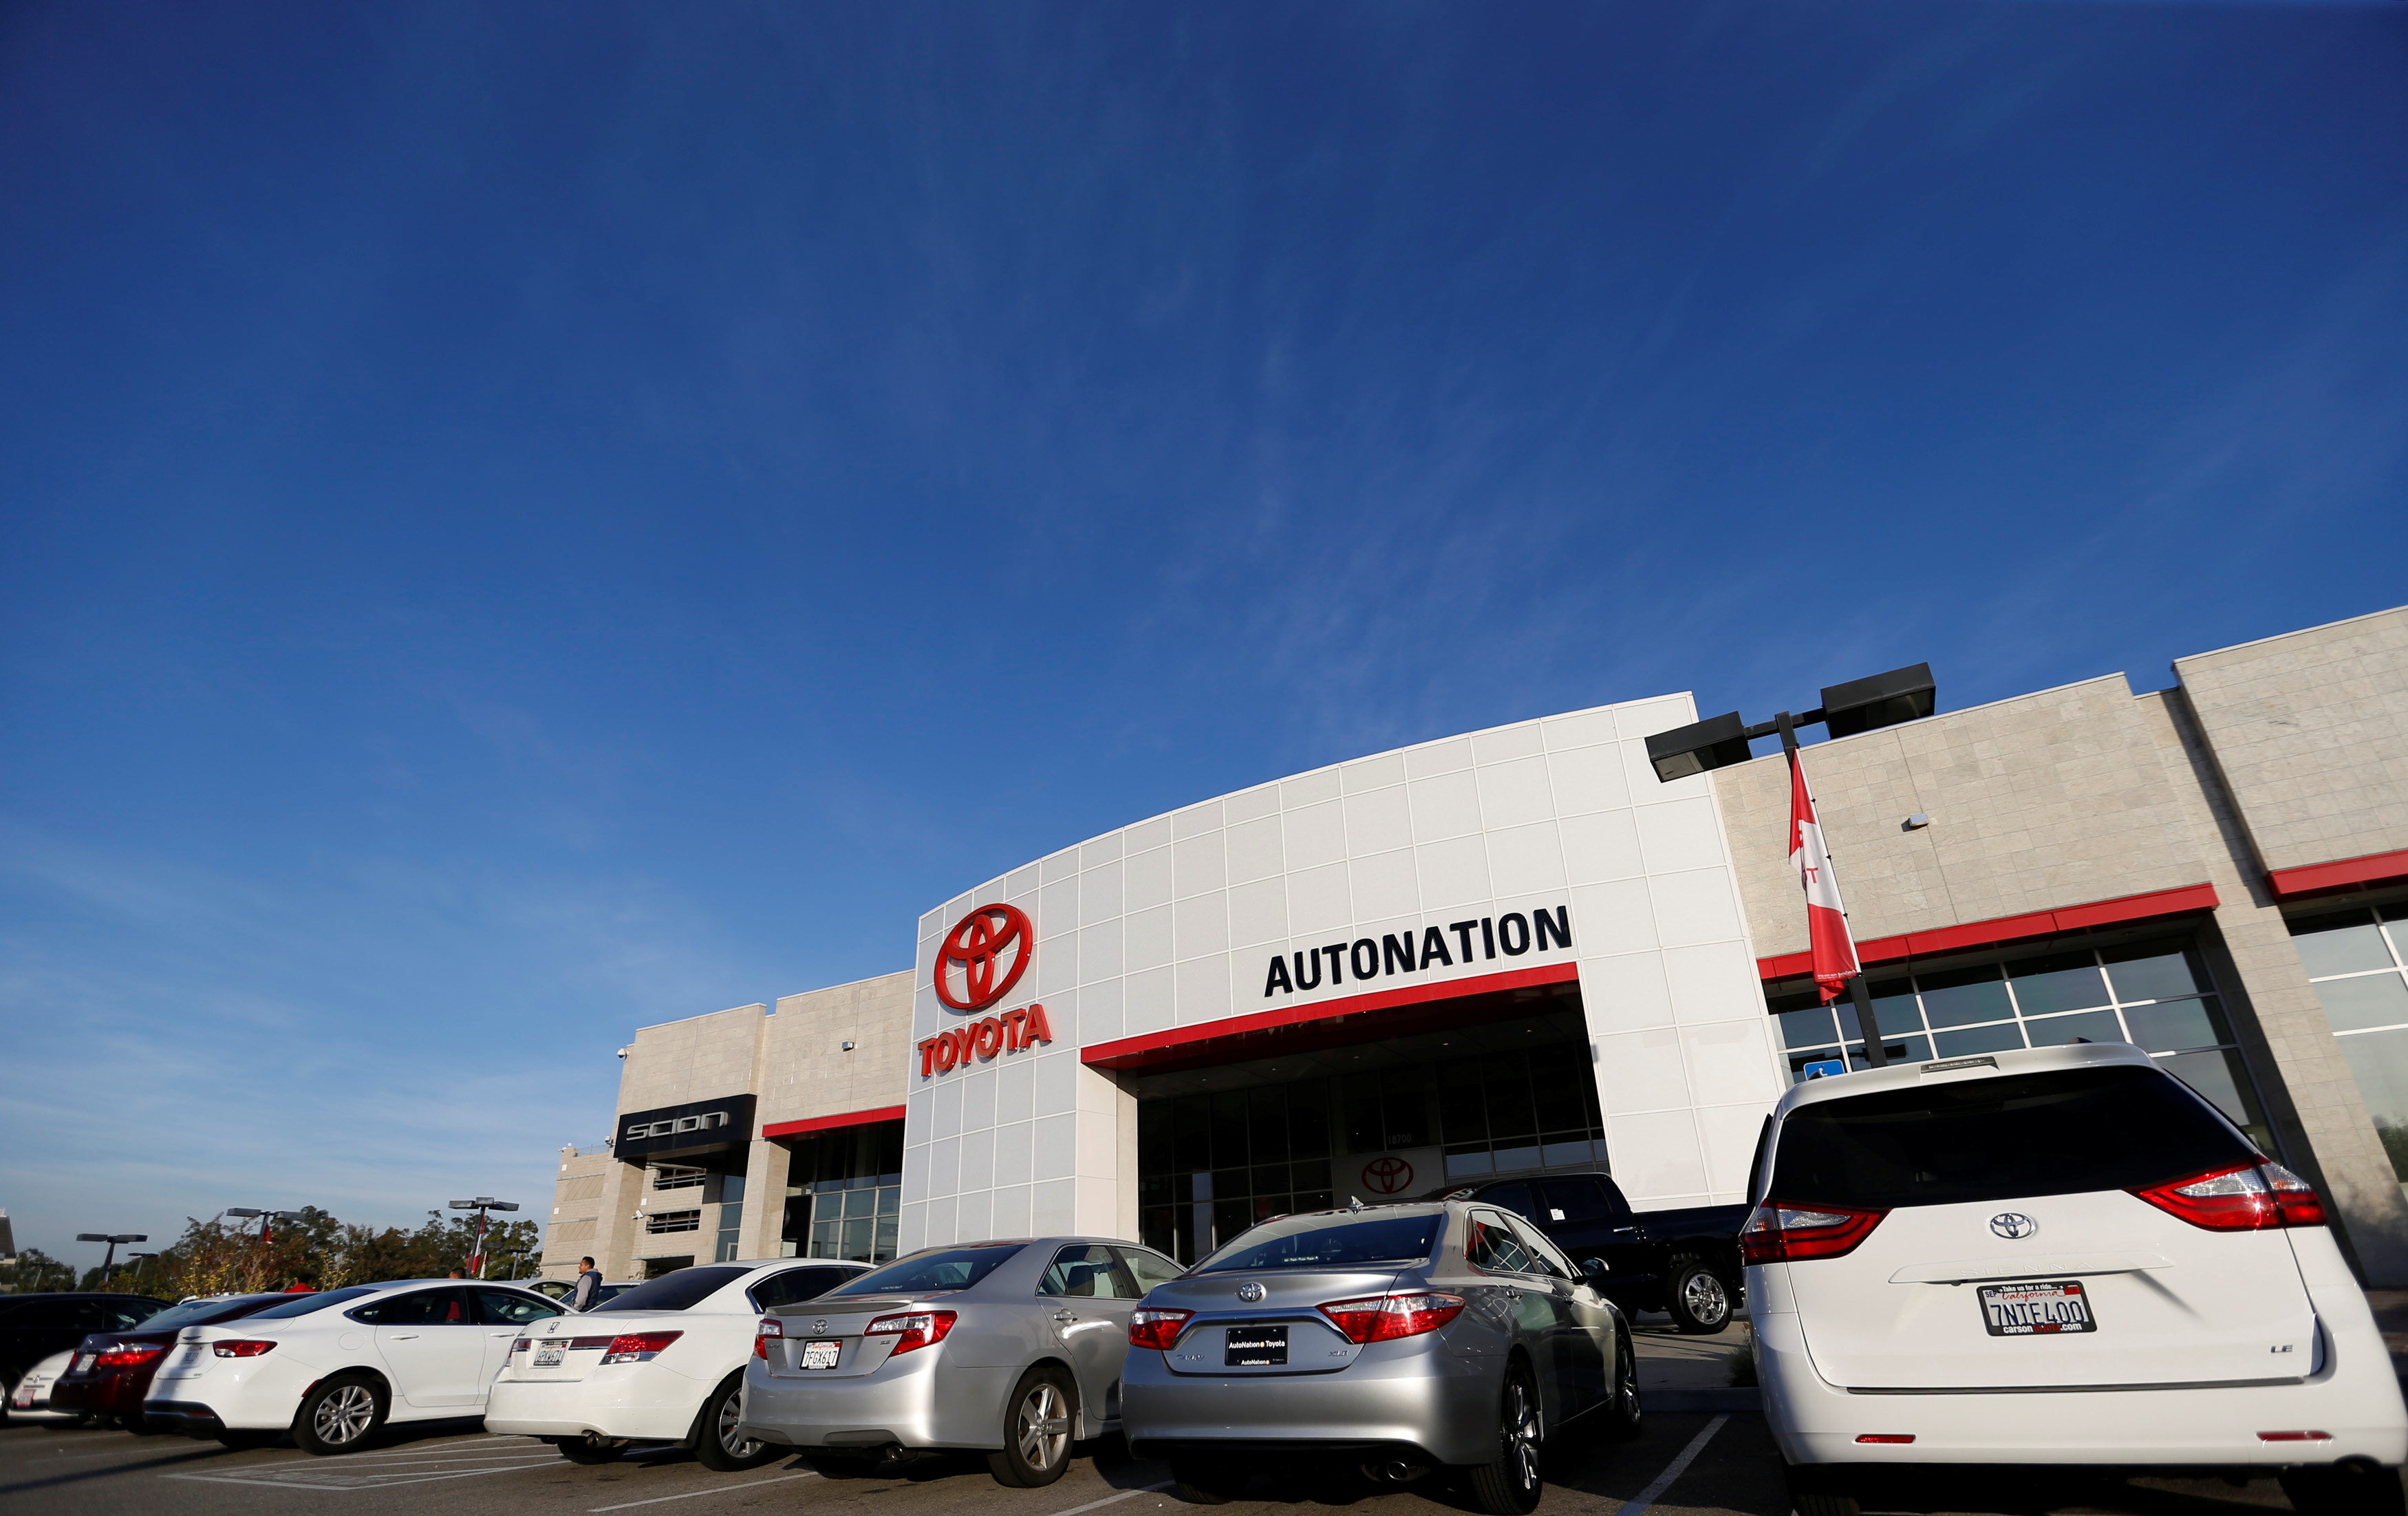 FILE PHOTO: Vehicles for sale are pictured on the lot at AutoNation Toyota dealership in Cerritos, California December 9, 2015.   REUTERS/Mario Anzuoni/File Photo